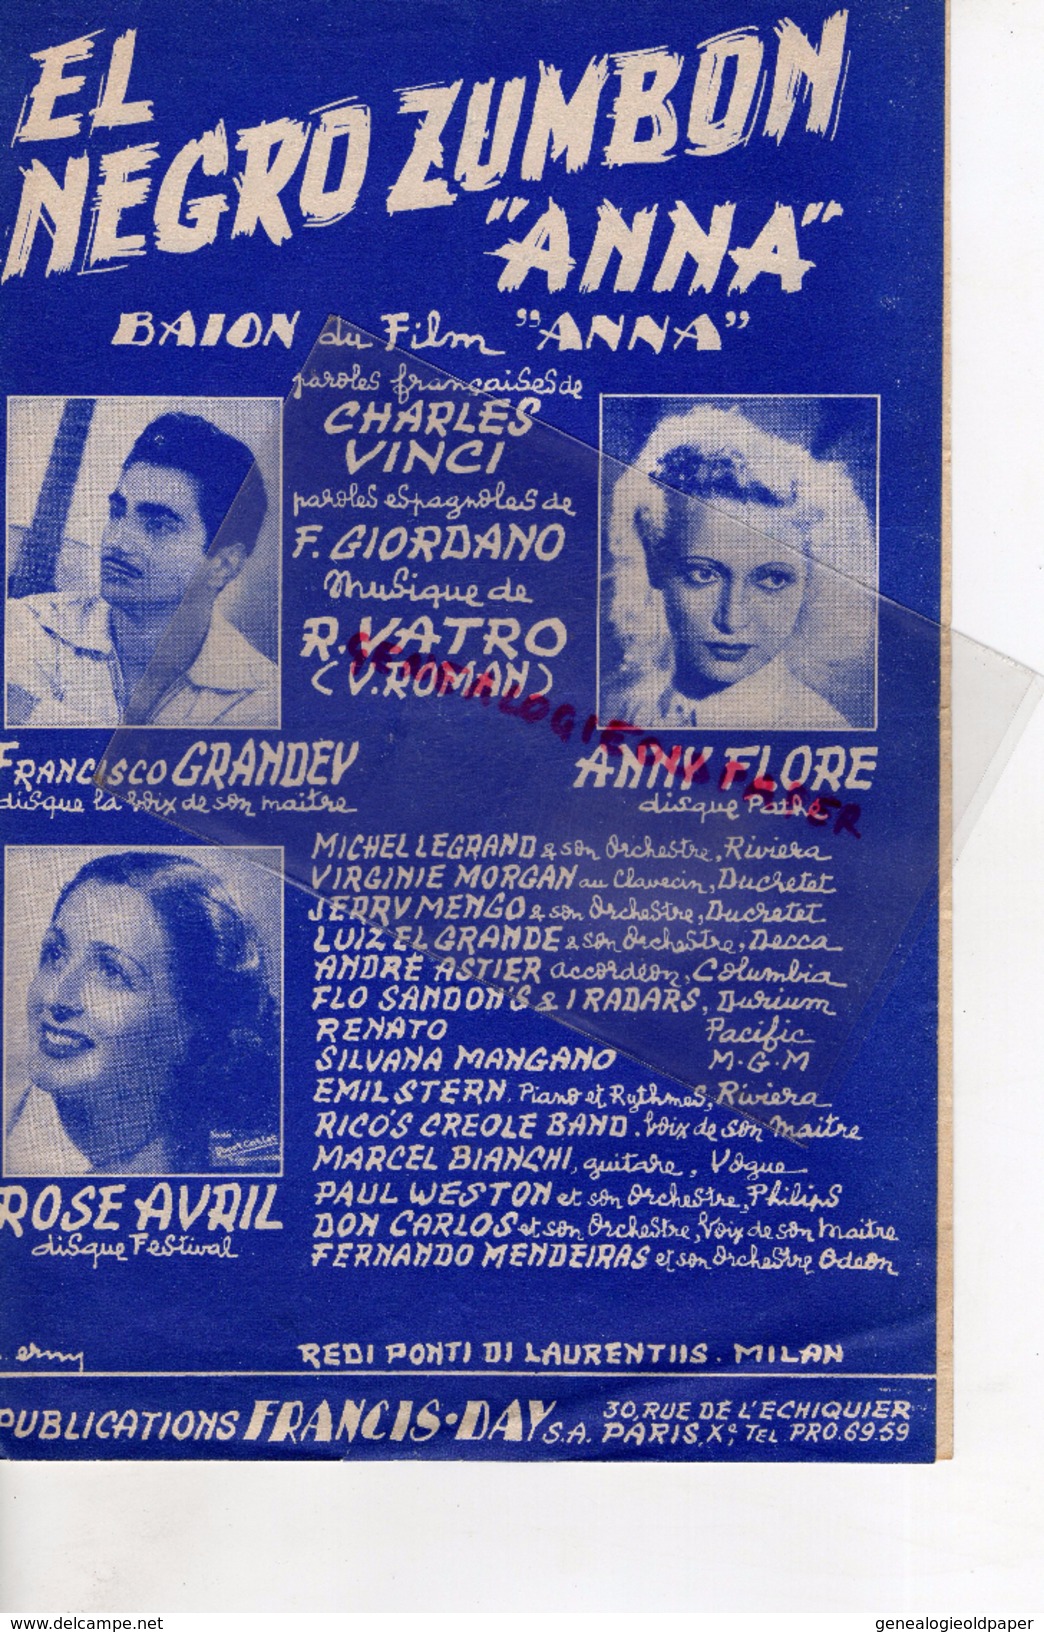 PARTITION MUSICALE-EL NEGRO ZUMBON- ANNA- CHARLES VINCI-FRANCISCO GRANDEY-ANNY FLORE-ROSE AVRIL-GIORDANO-VATRO-DAY - Partitions Musicales Anciennes